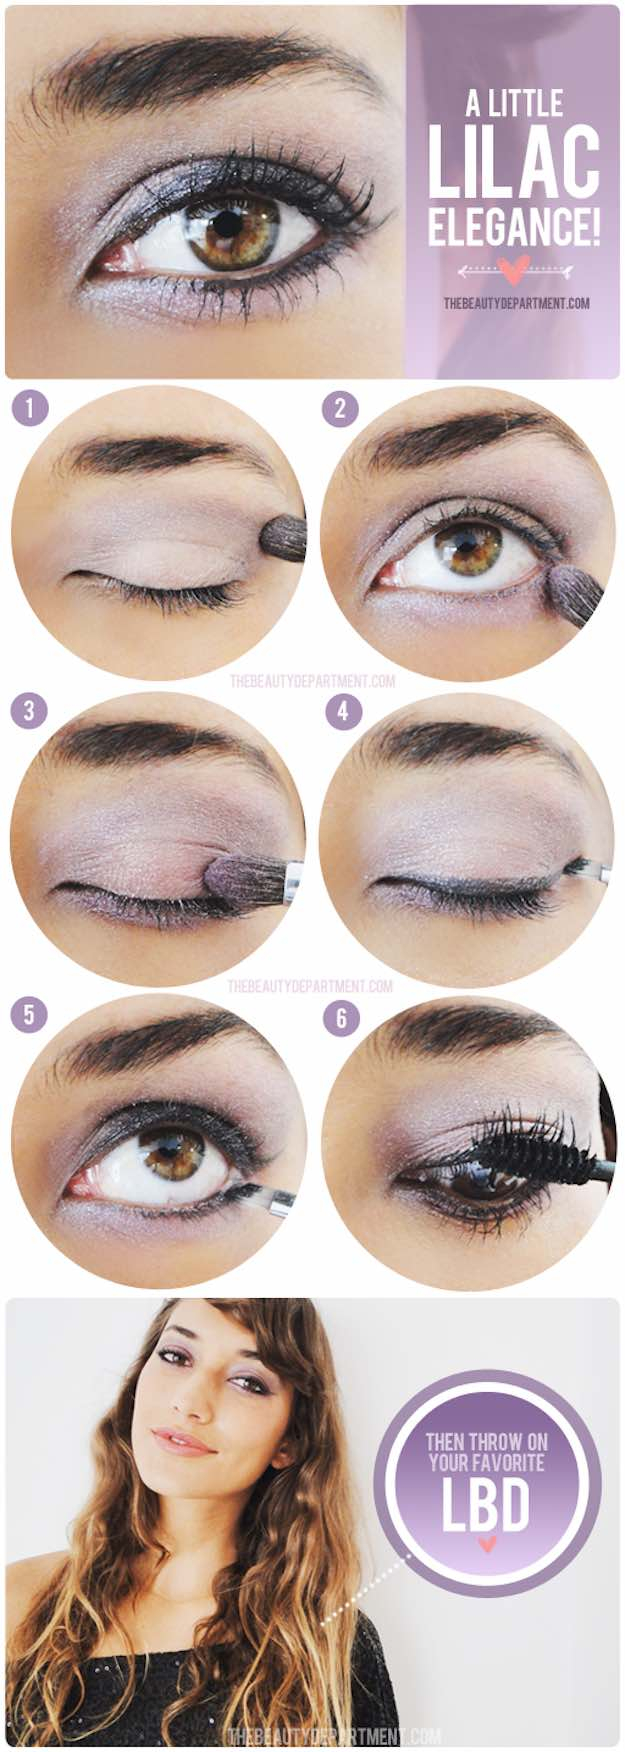 Pretty Makeup For Brown Eyes 31 Awesome Makeup Tutorials For Brown Eyes The Goddess